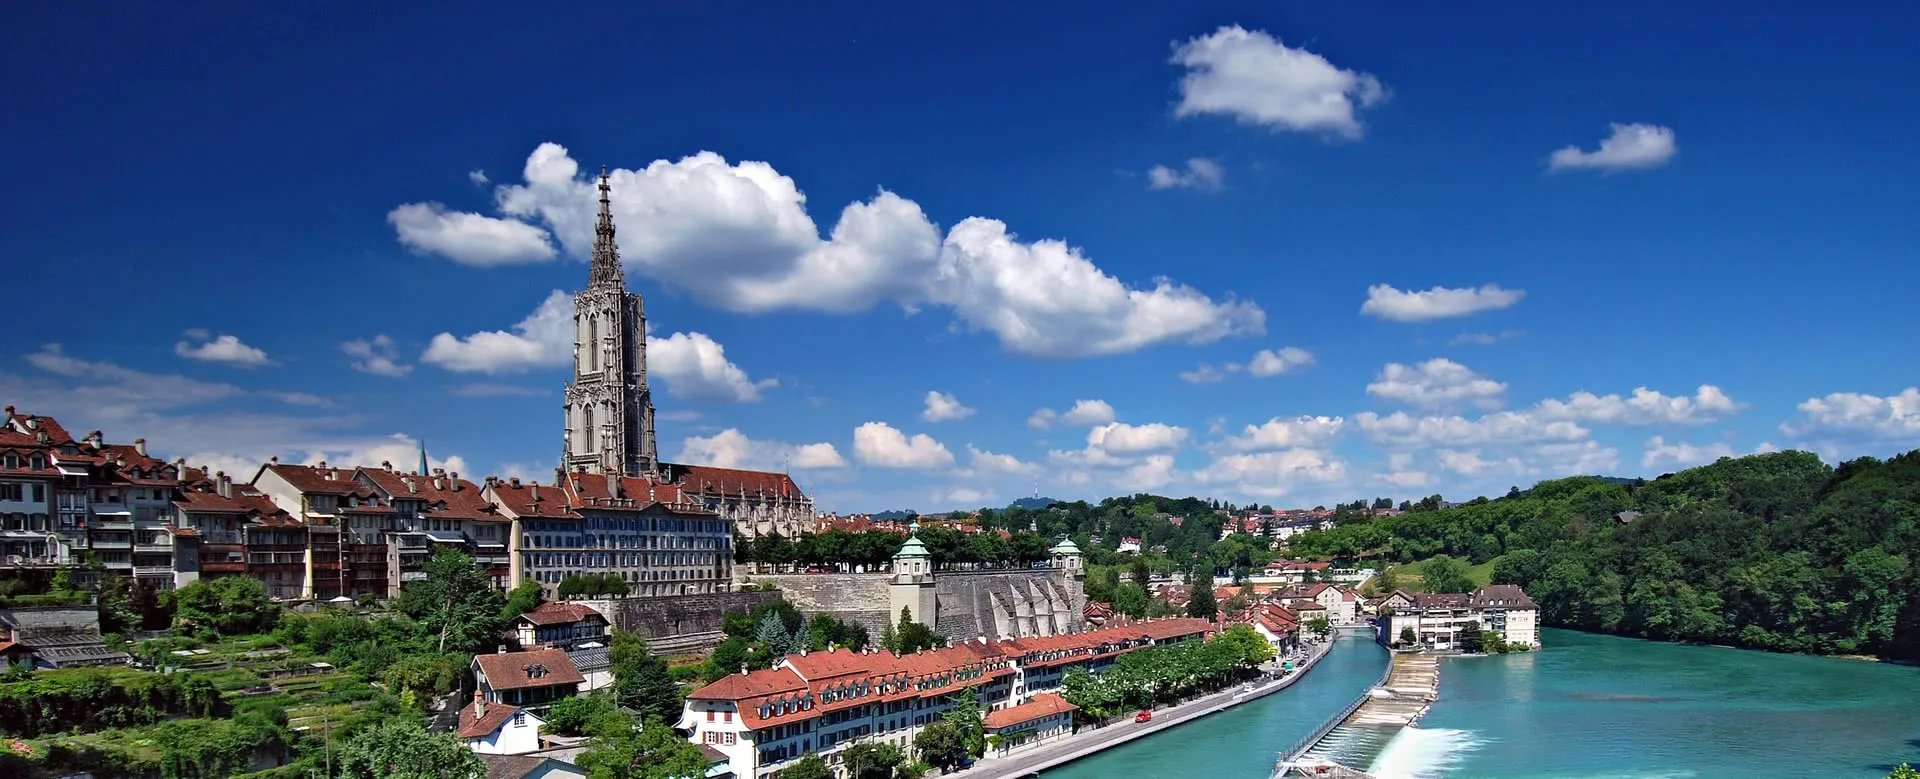 Bern - the destination for company trips